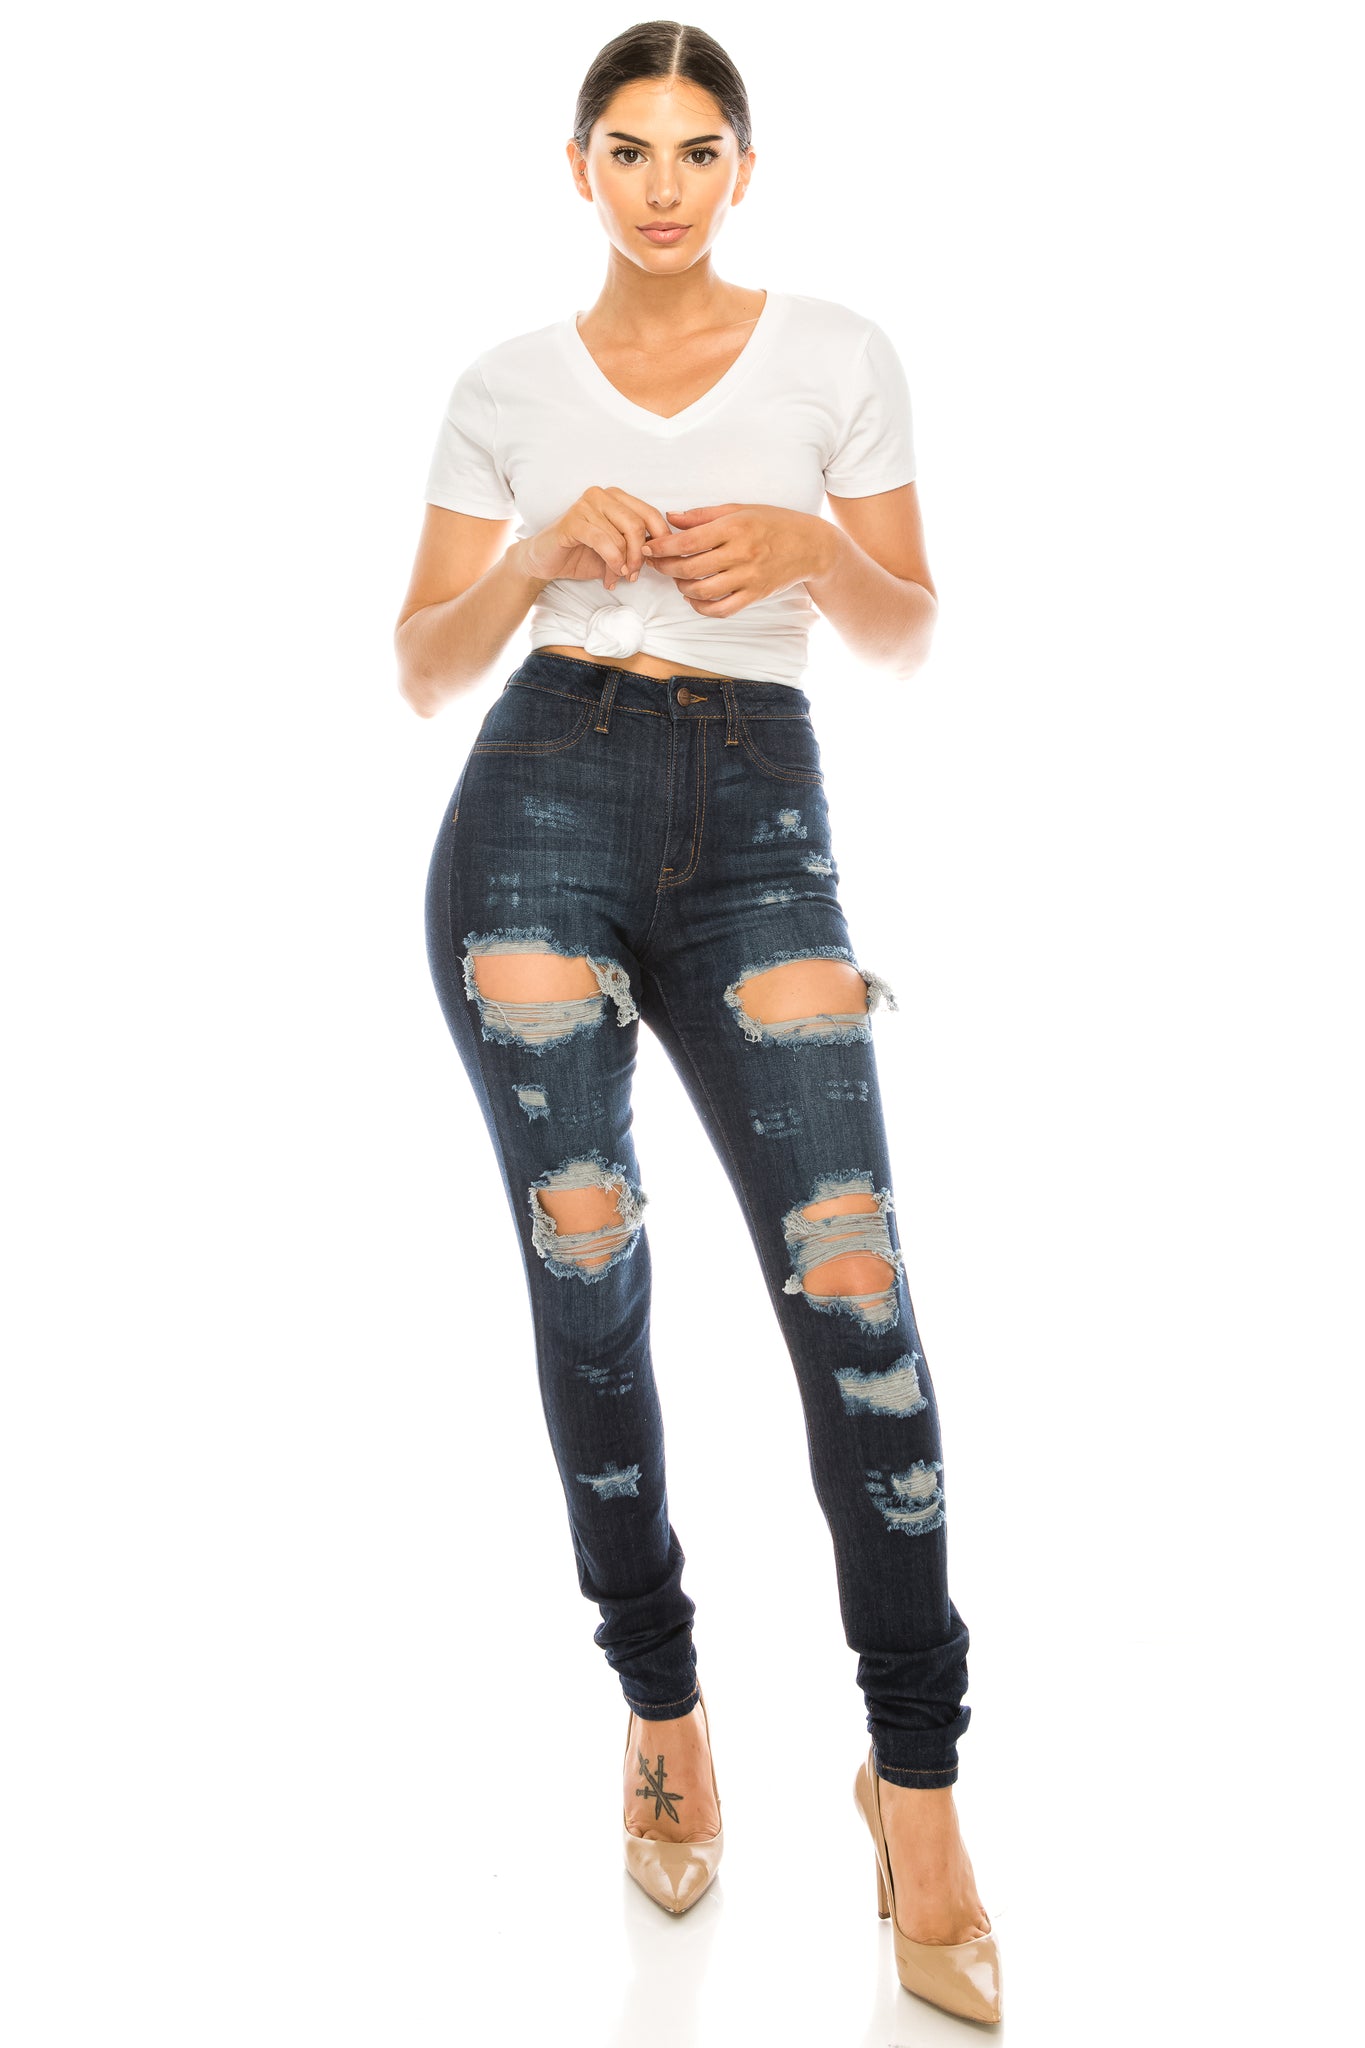 Super High Waisted Distressed Skinny Jeans with Cut Outs – Aphrodite Jeans